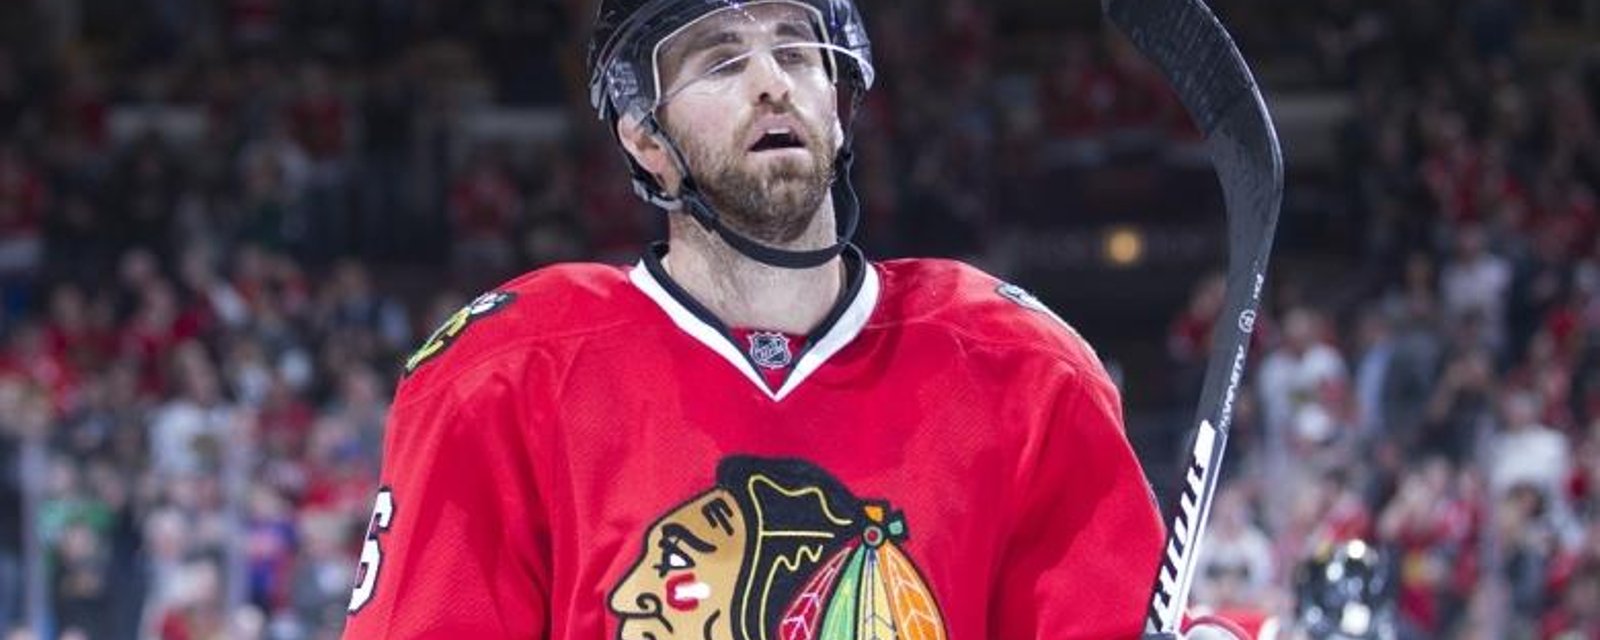 Veteran forward and former NHL captain does not believe his team will re-sign him.